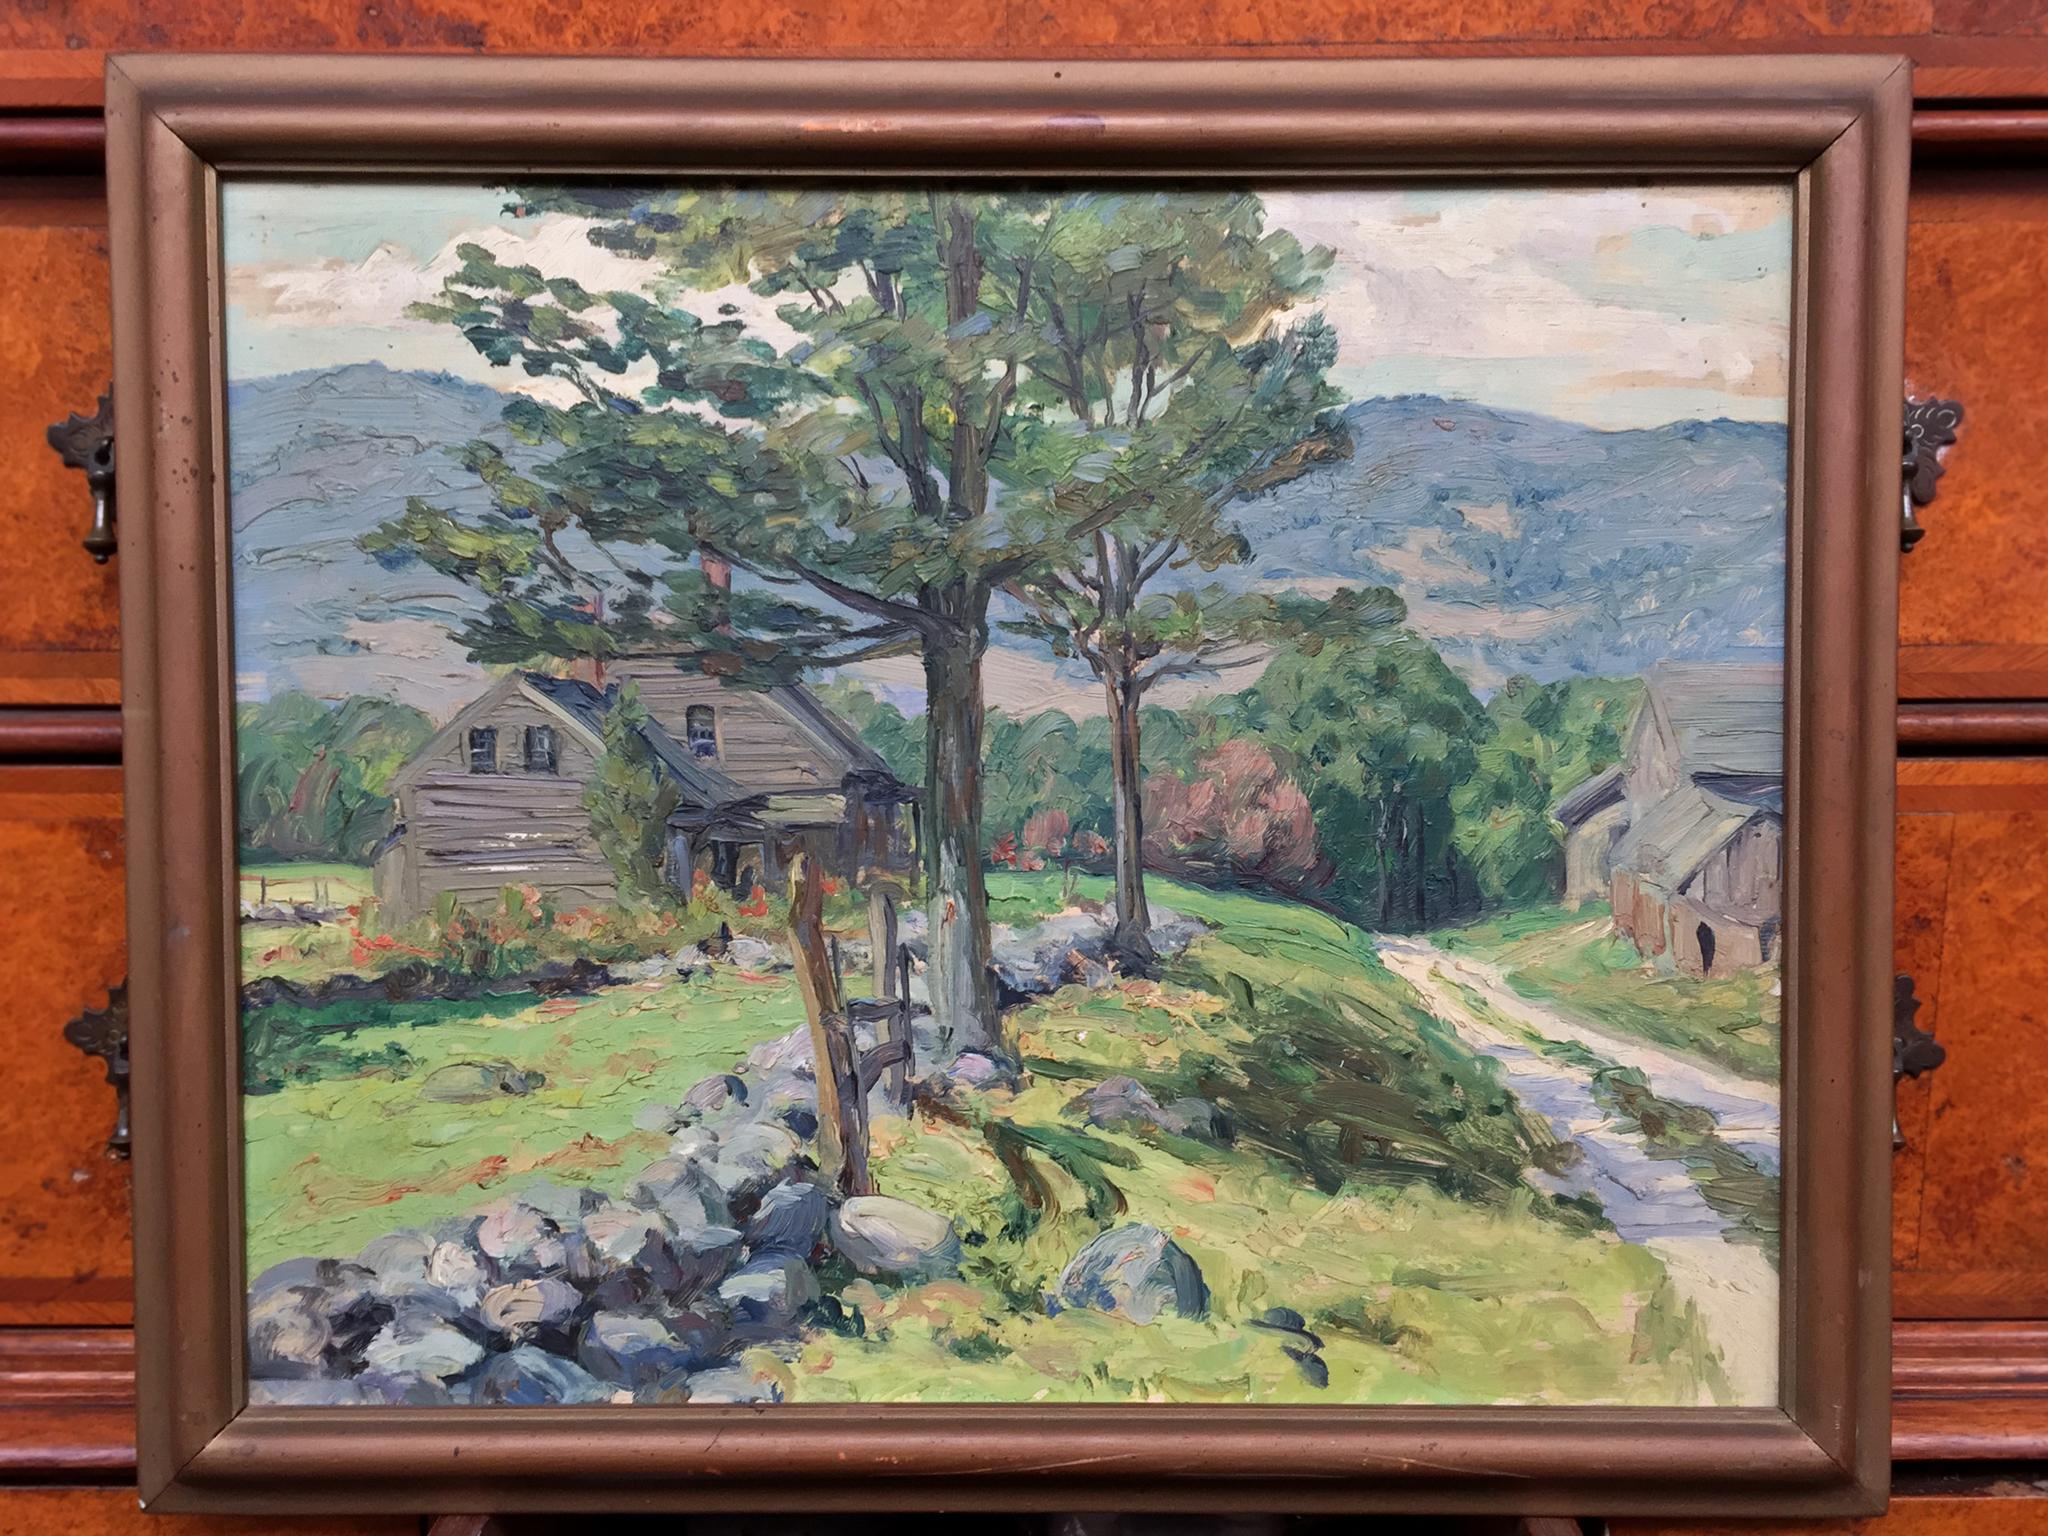 An idyllic landscape painting by the artist Walter King Stone. Oil on Masonite board, circa mid-late 1940s. The painting portrays a countryside scene with a tree-lined path leading to what perhaps is small town, with a forest and mountains in the